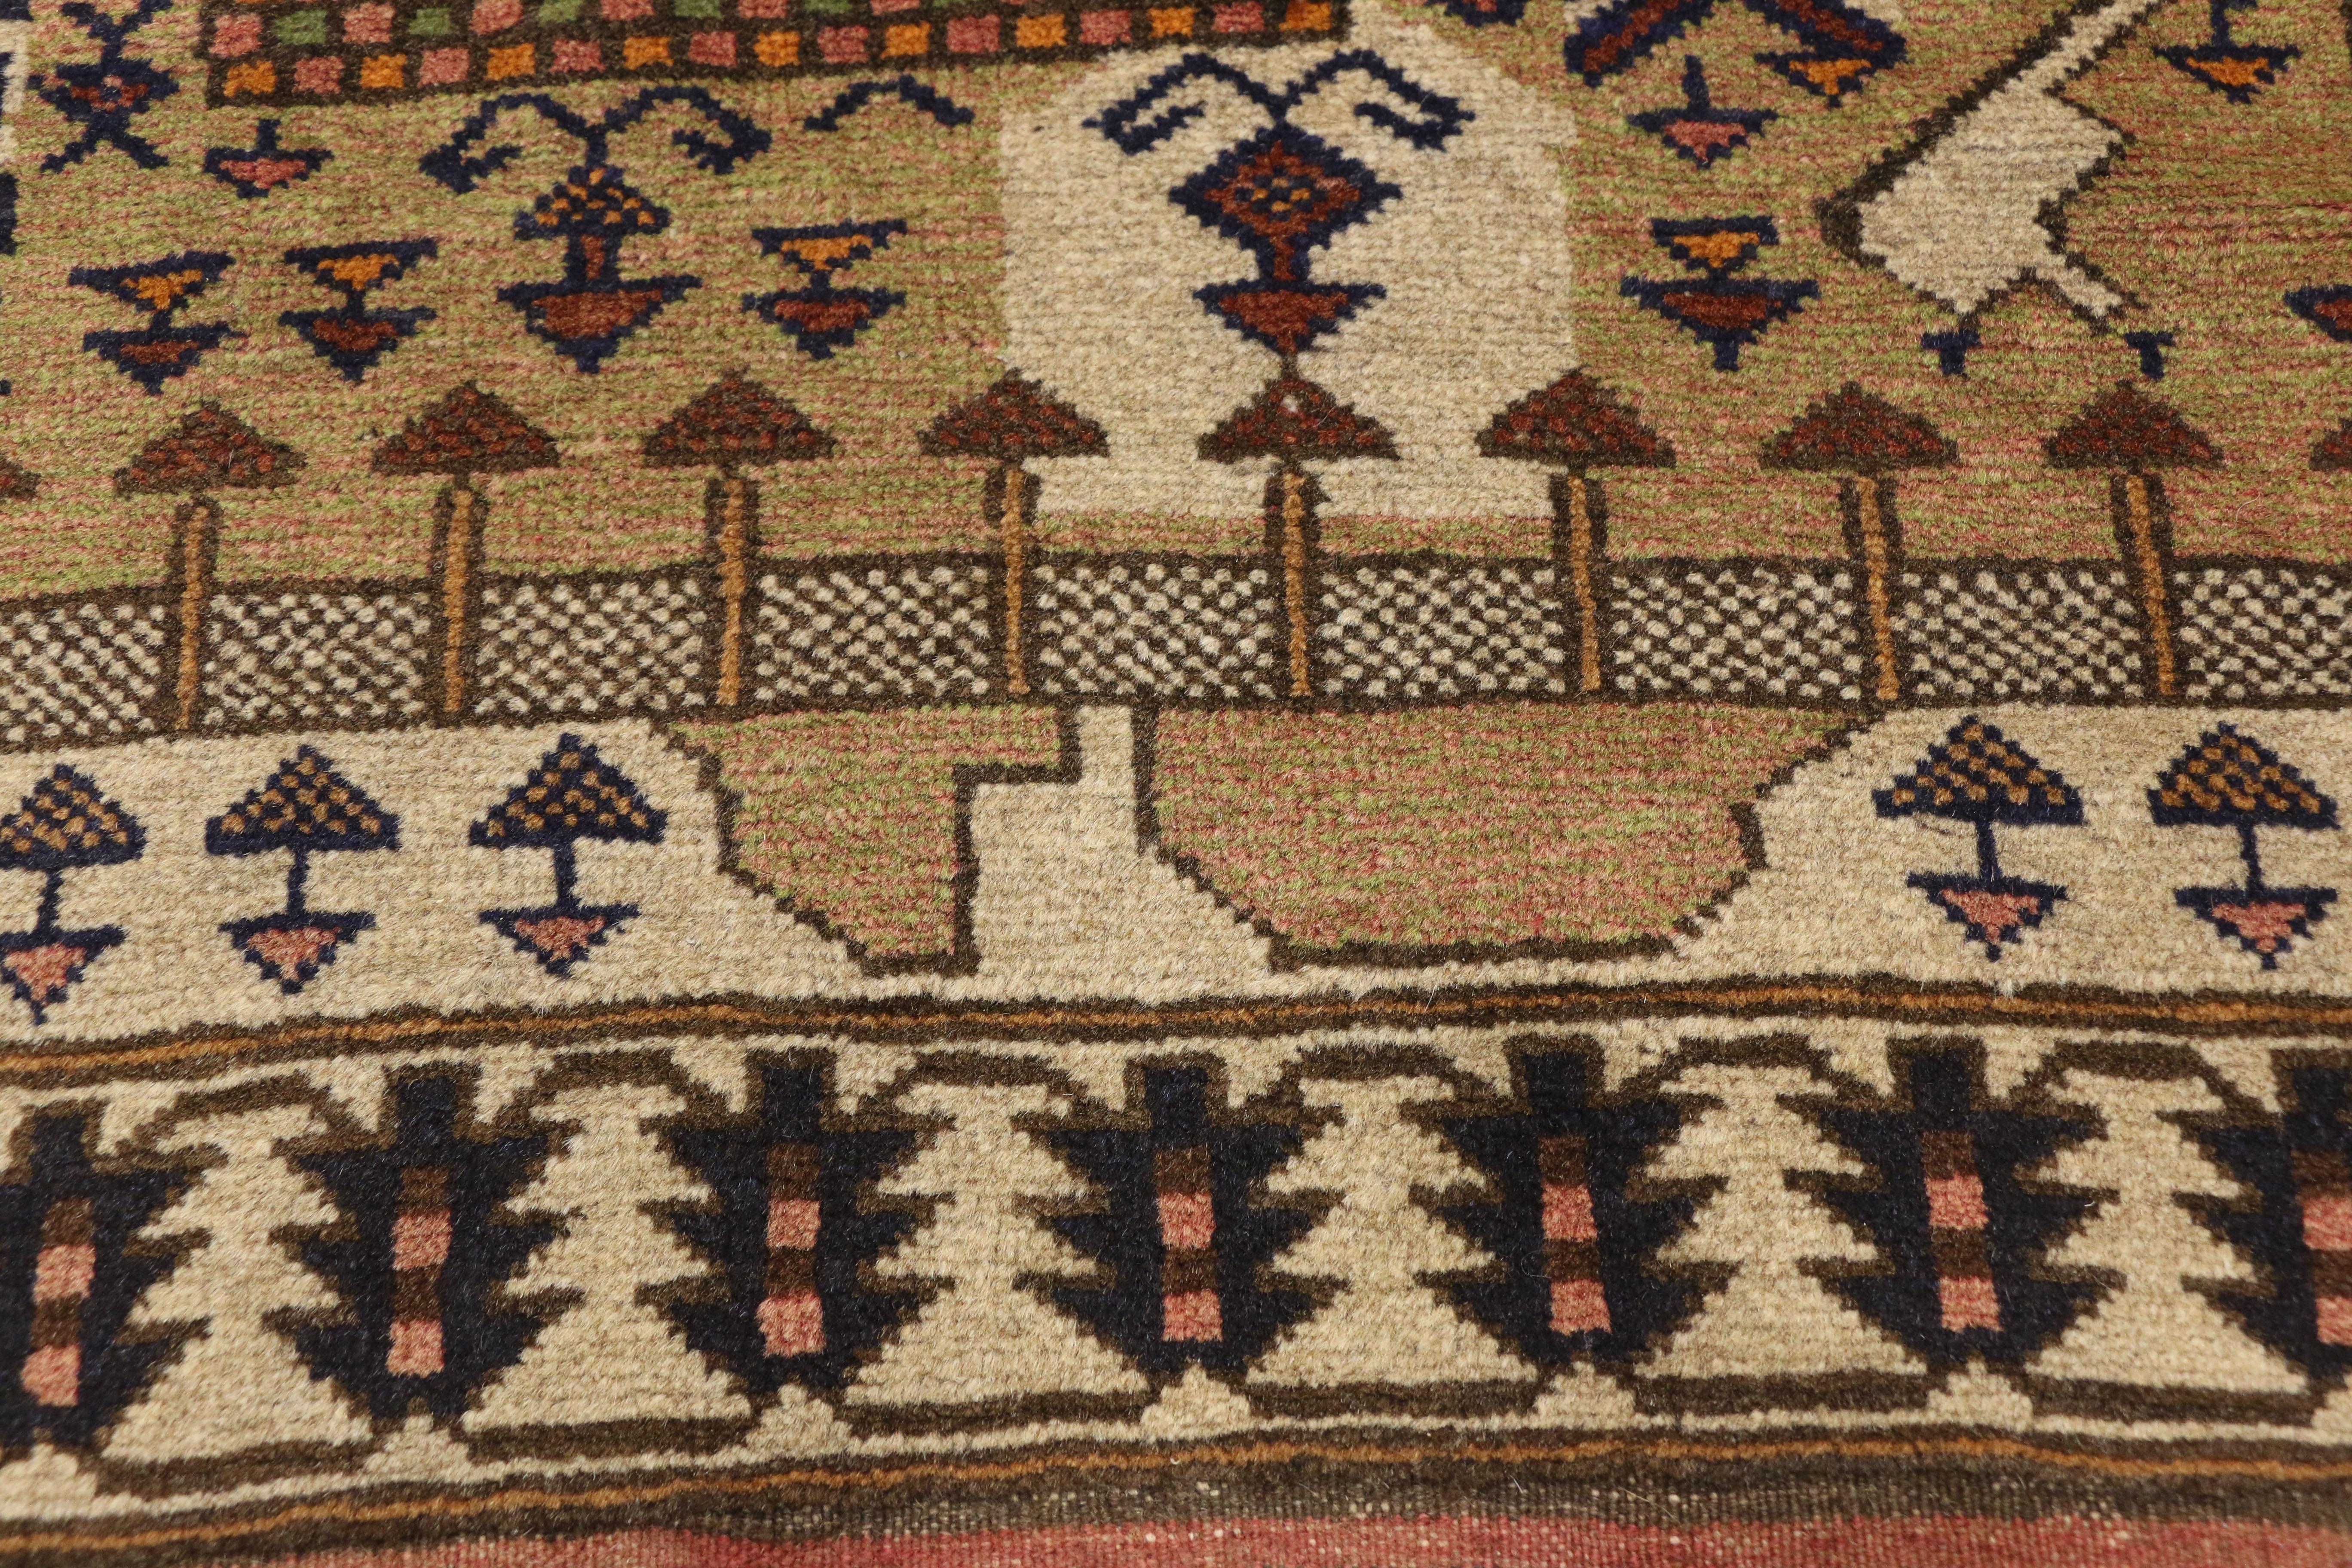 Vintage Afghan Balouch War Rug with Tribal Nomadic Style In Good Condition For Sale In Dallas, TX